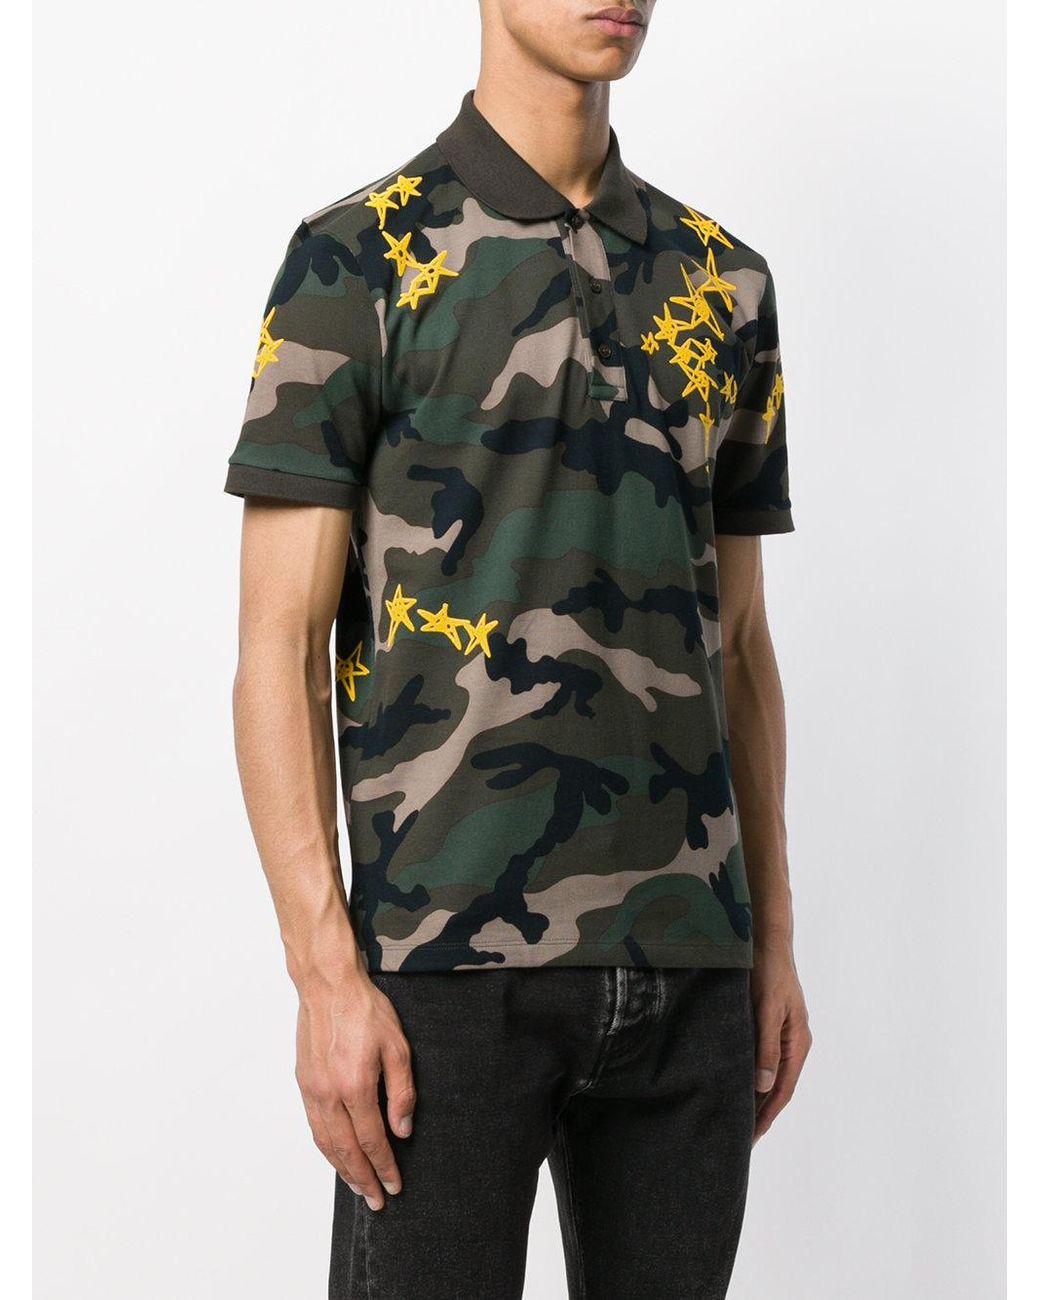 Valentino Camouflage And Star Print Polo Shirt in Green for Men | Lyst